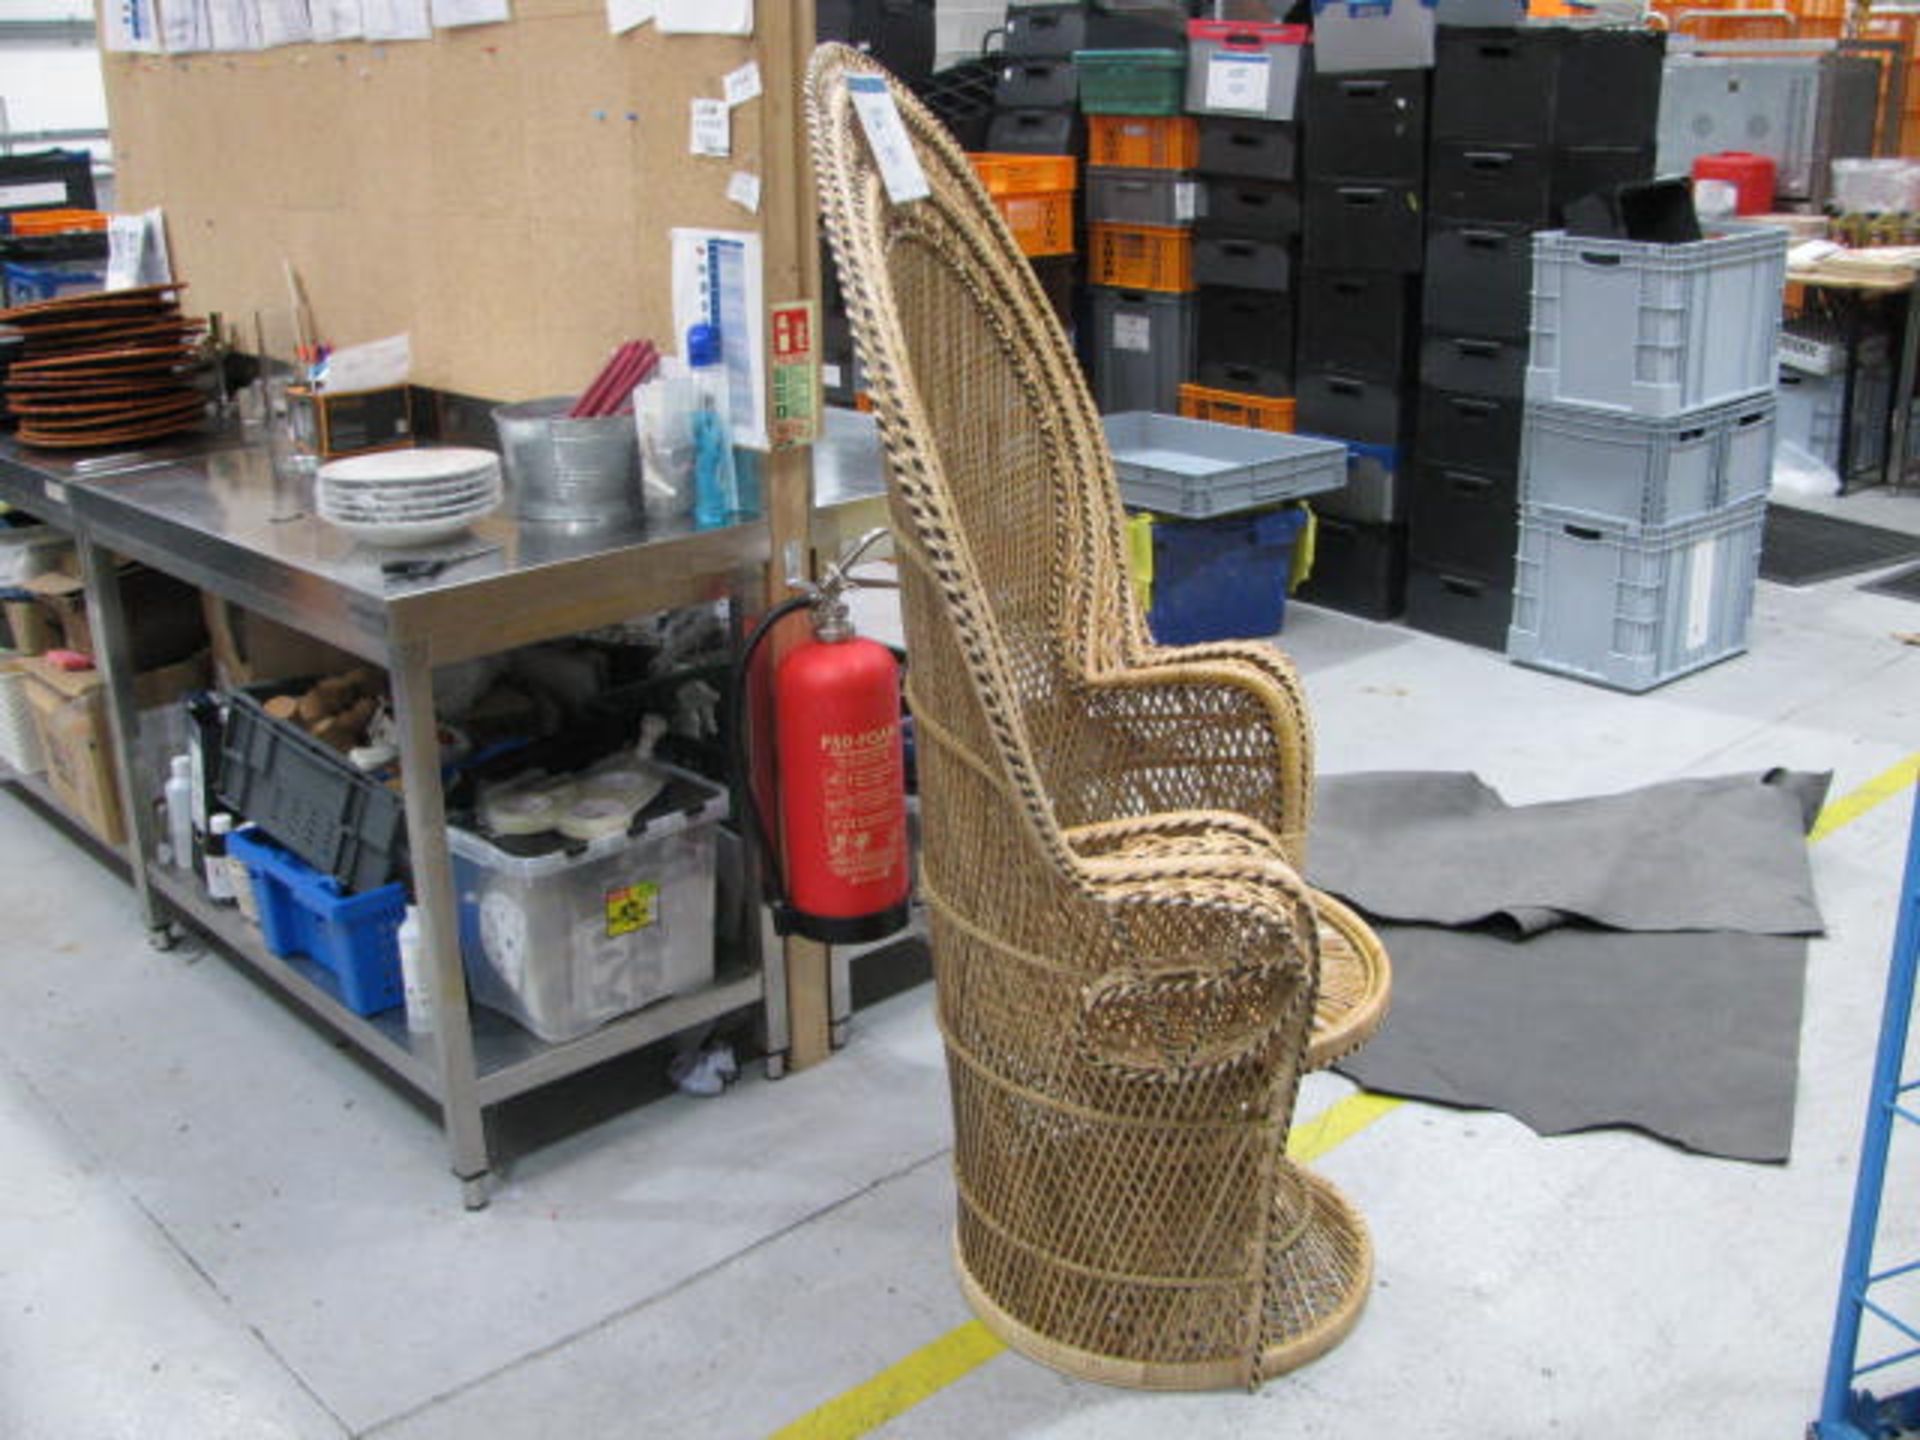 Peacock style wicker chair - Image 2 of 3